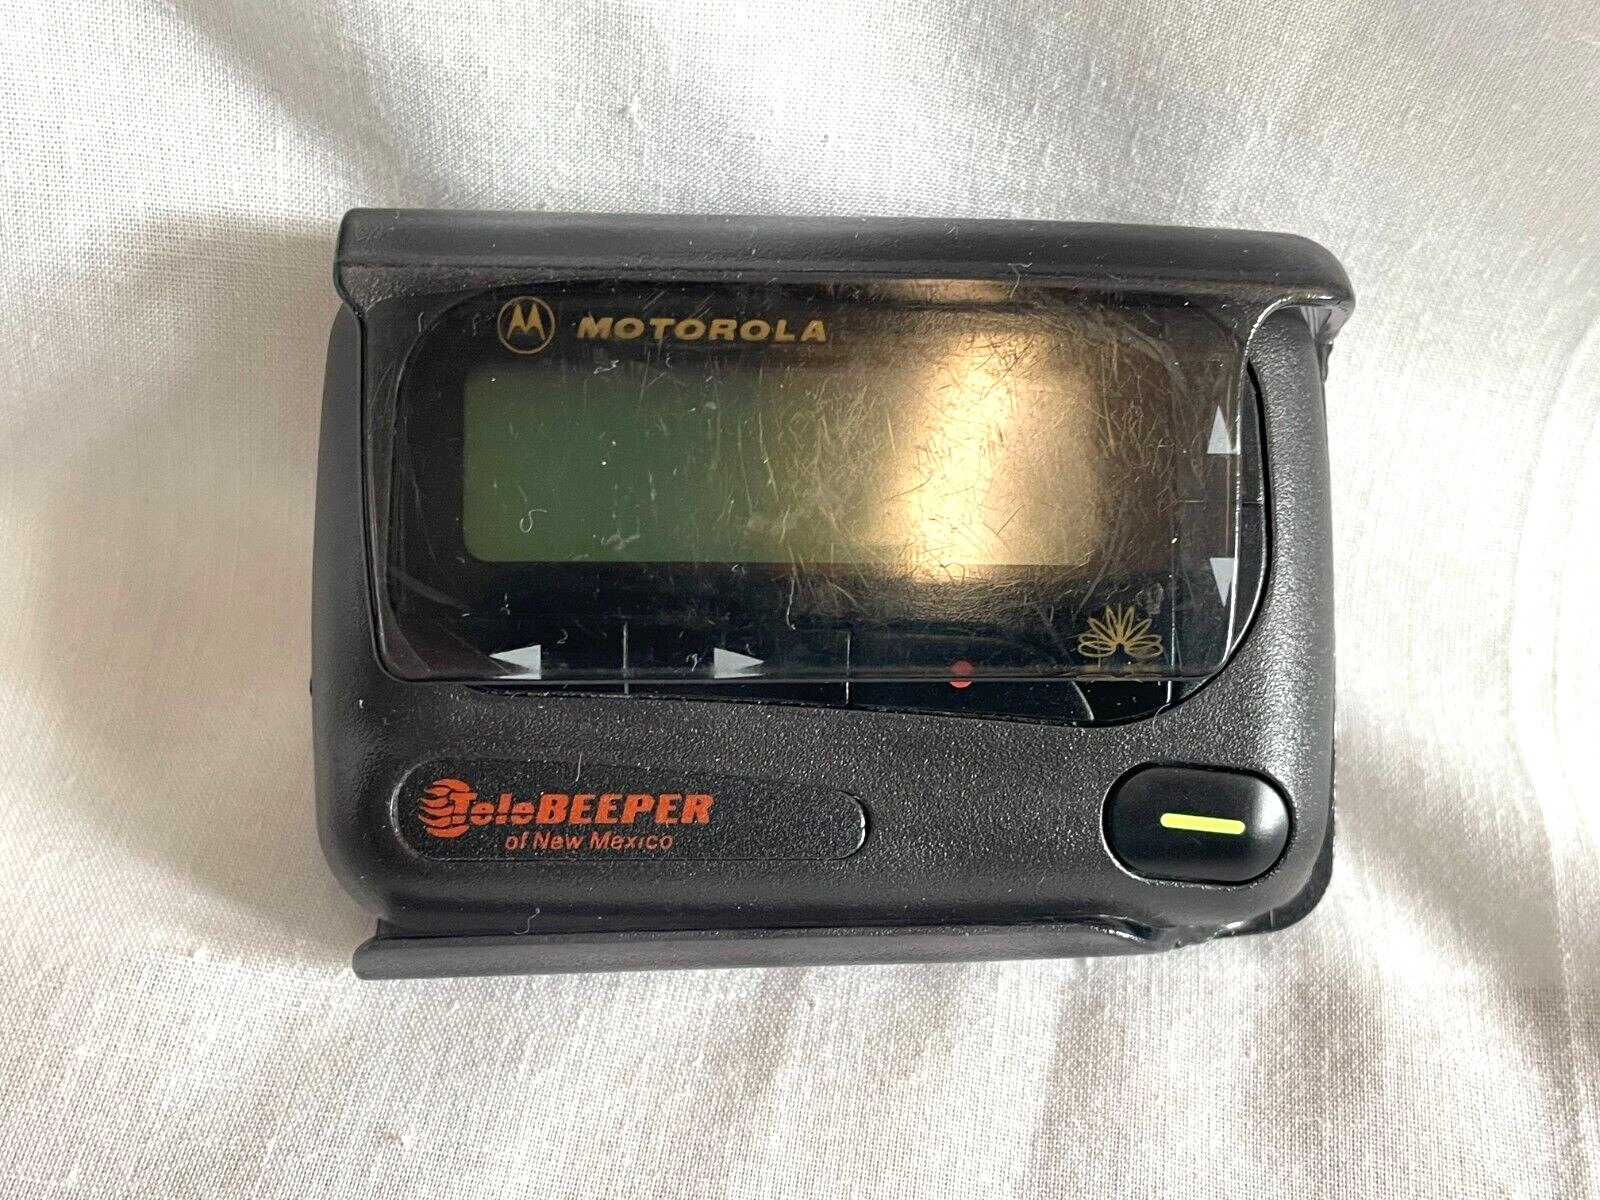 Motorola Pager Tested